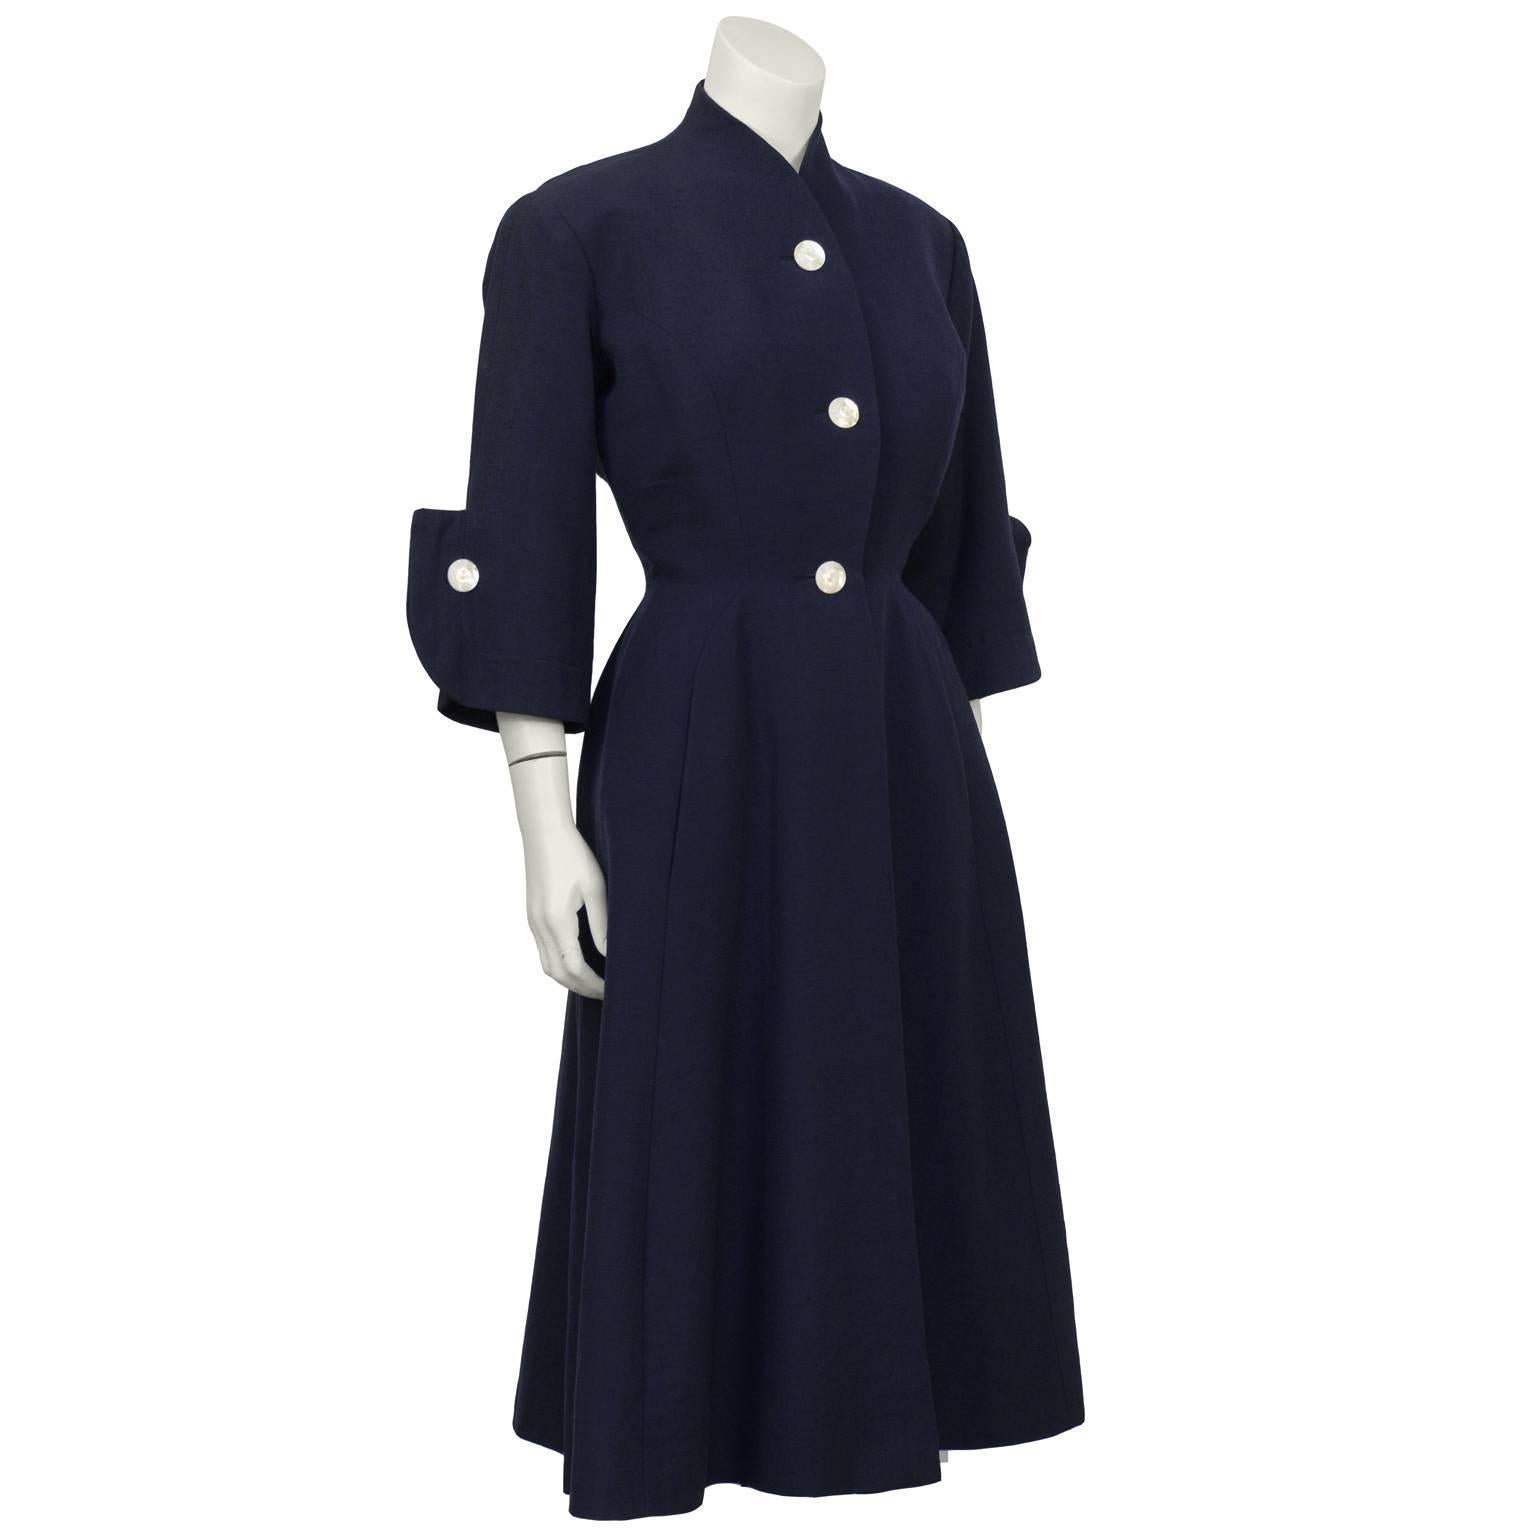 Staebe-Seger navy coat dress from the 1950's. Inspired by Dior’s “New Look”, the designers Gert Staebe and Hans Seger, regarded as the haute couturiers of Germany, created their version with subtle padding above the bust as well as on the hips. 